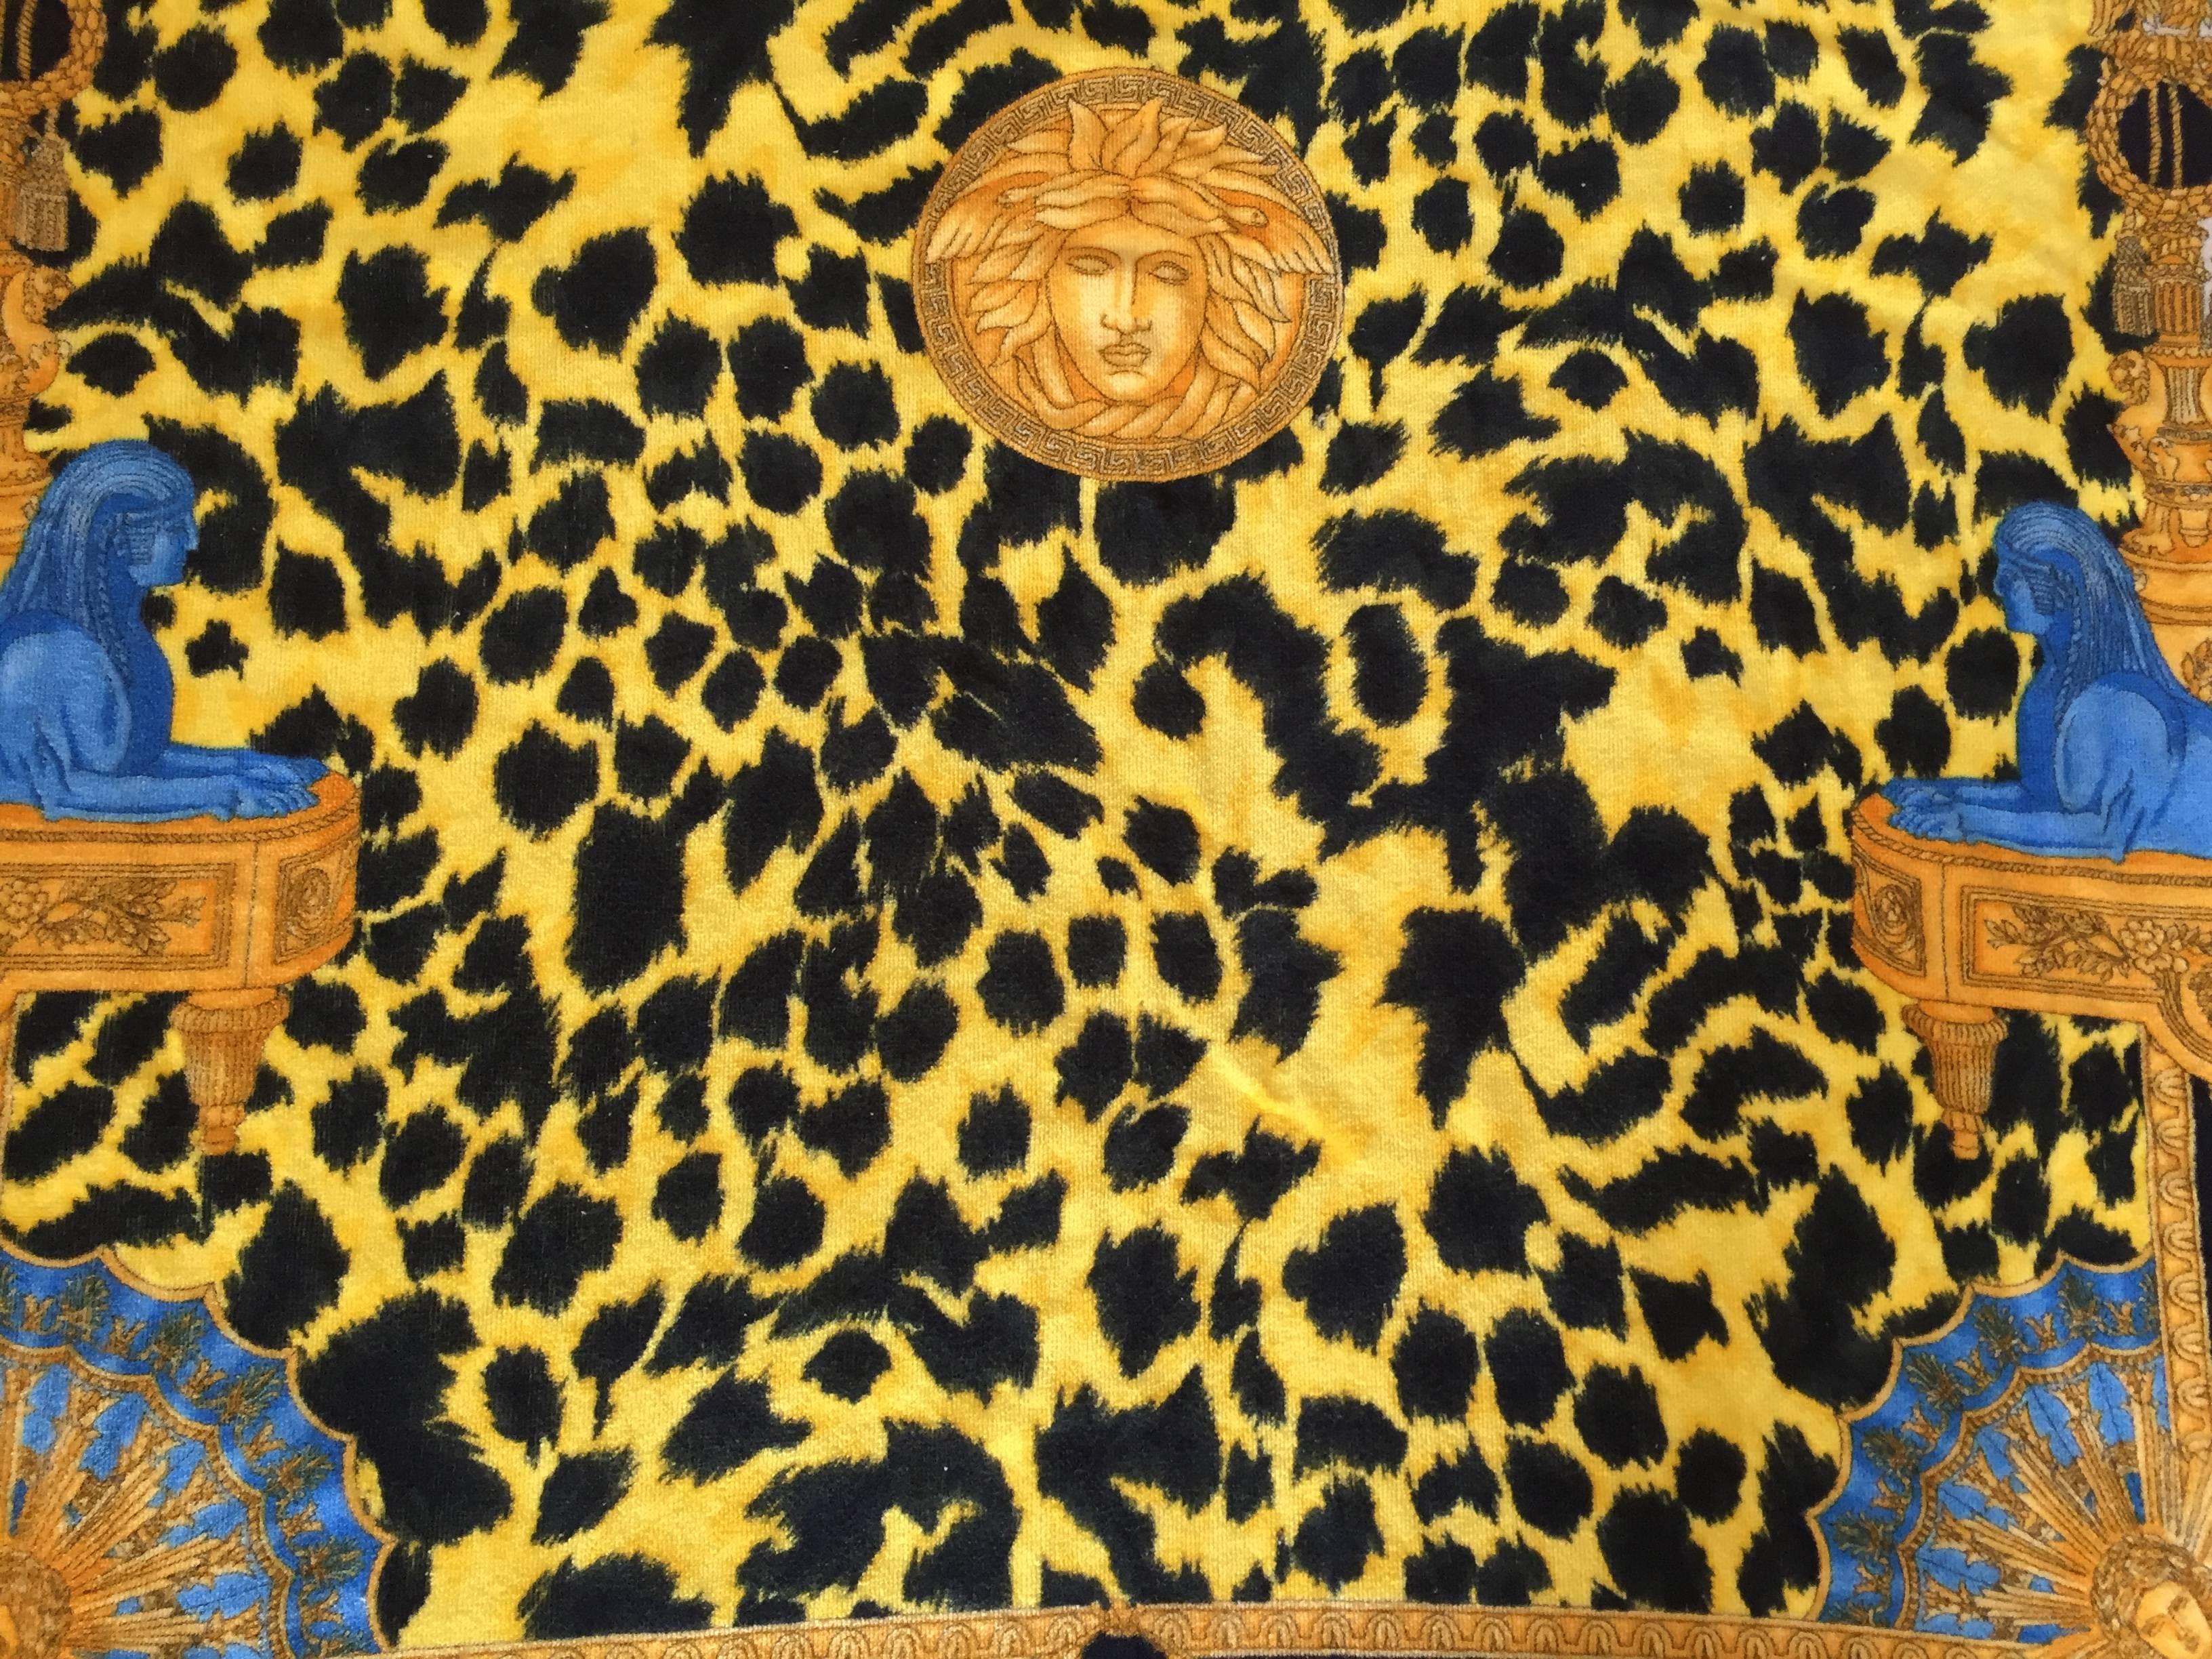 Atelier Versace Gianni Versace Vintage Beach Blanket / Towel In Good Condition For Sale In Cloverdale, CA